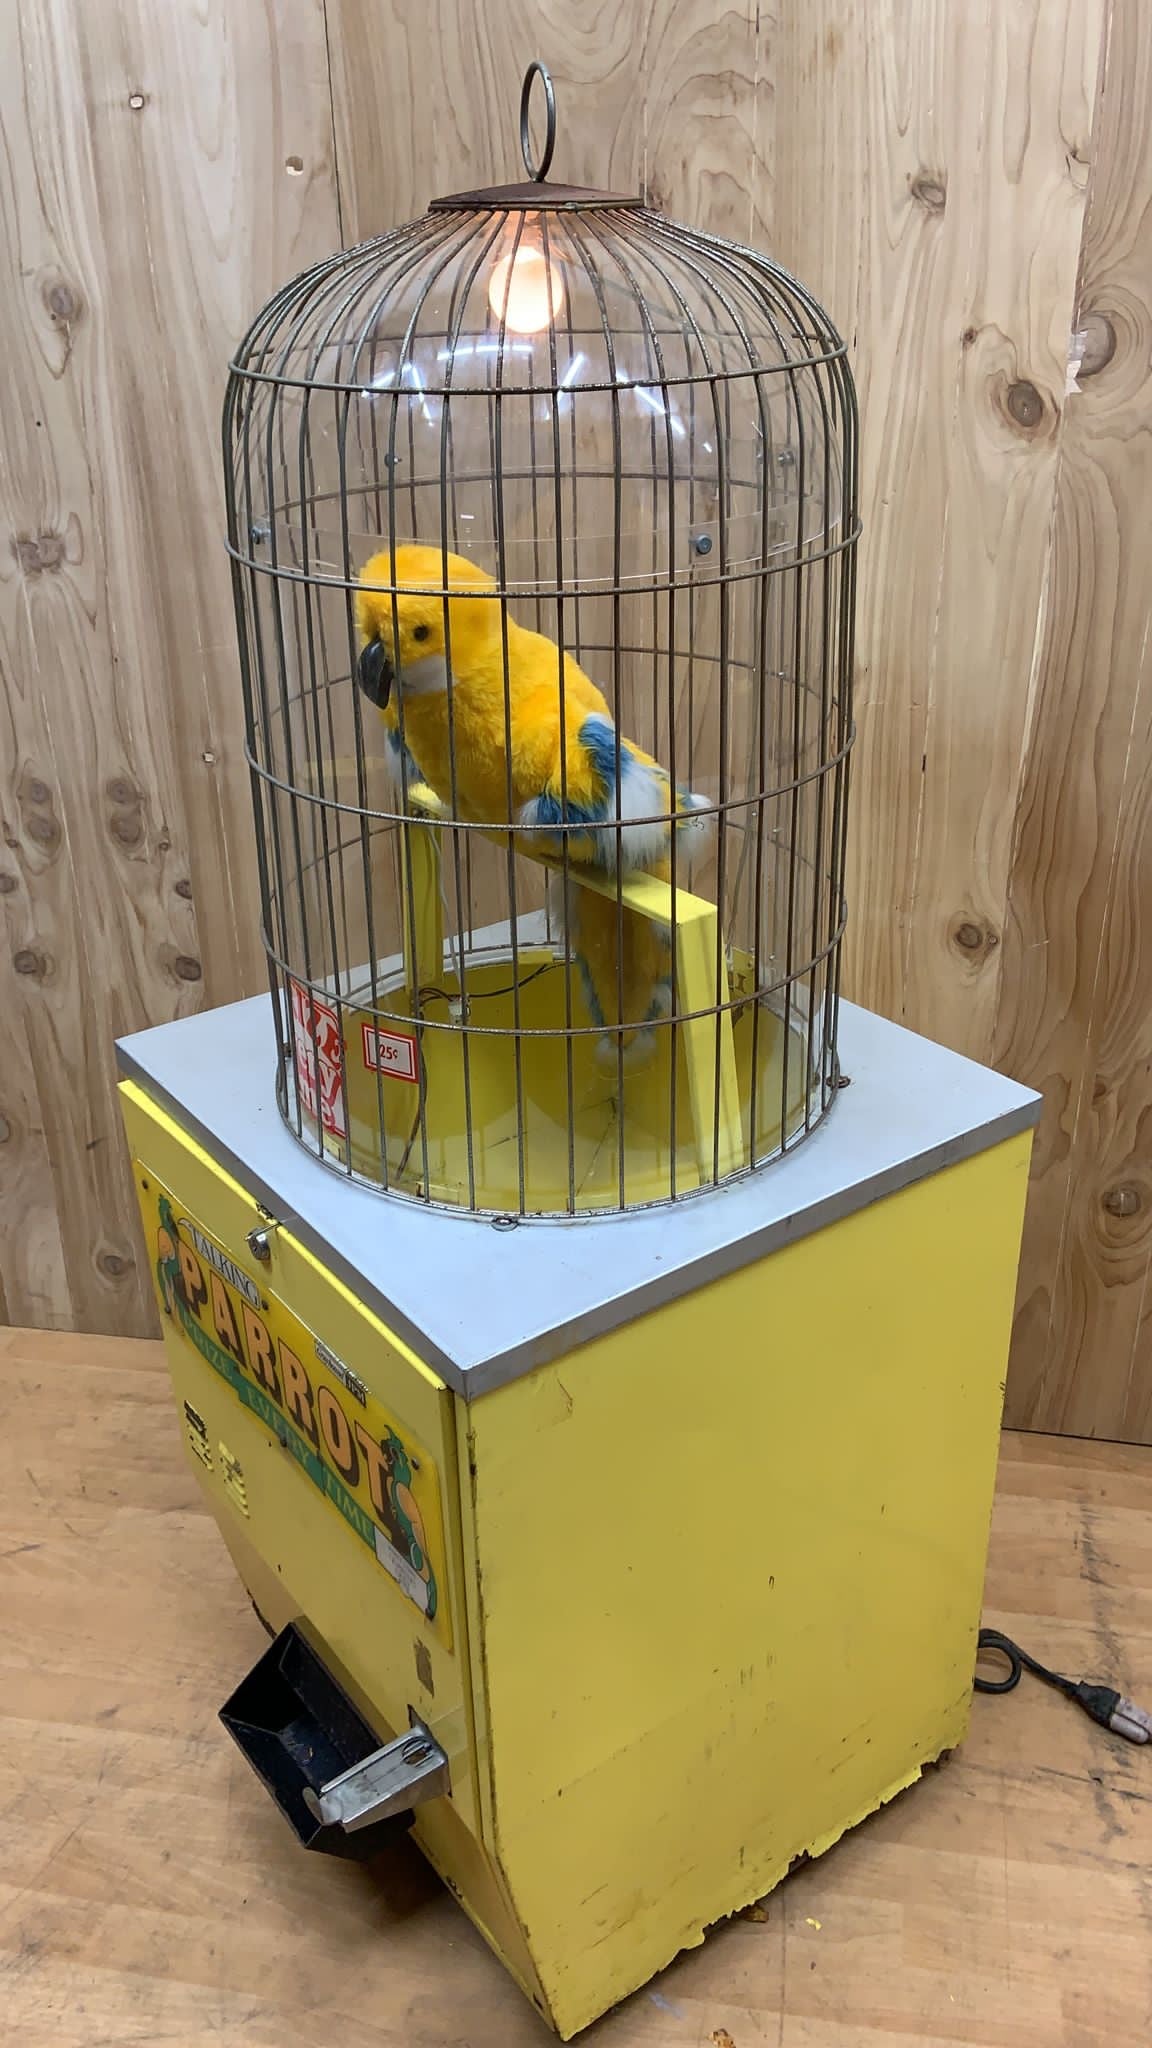 Gray Hound (JPM) 25 Cent Talking Parrot “Prize Every Time” Vending Machine